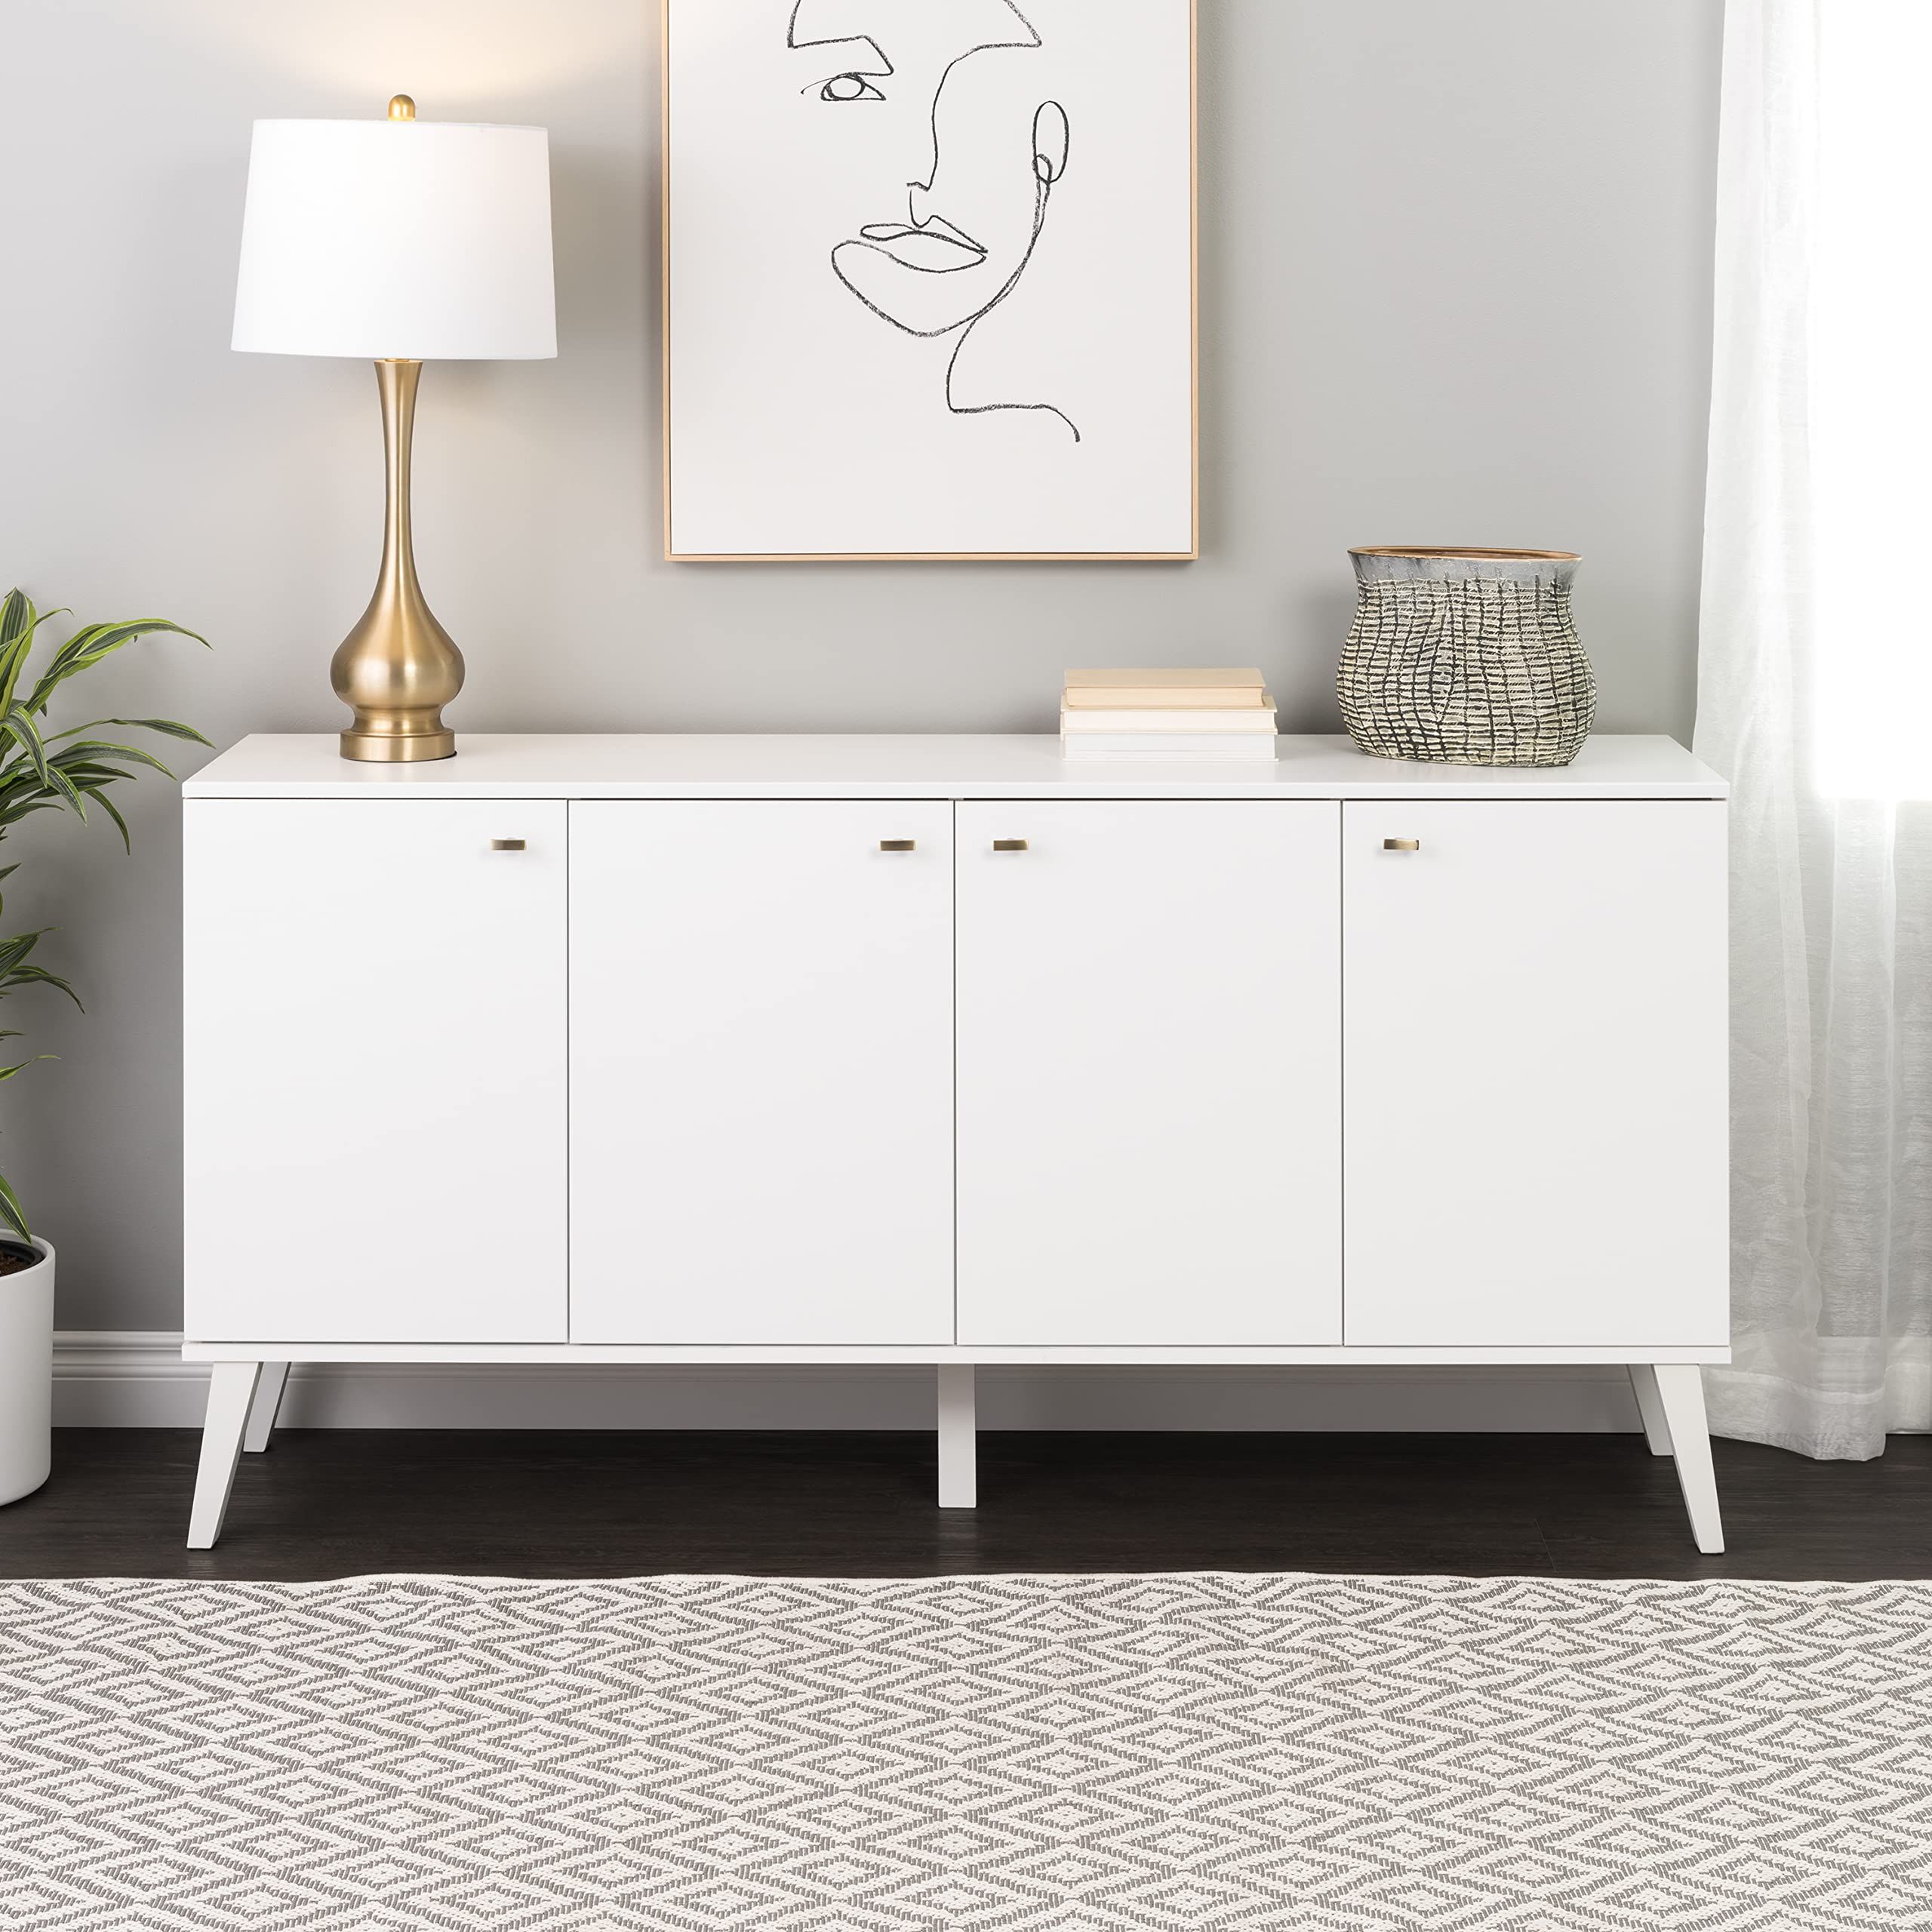 Amazon: Prepac Milo Mid Century 4 Door Buffet, 16" D X 64" W X 32" H,  White : Home & Kitchen Within Widely Used Mid Century Modern White Sideboards (Photo 1 of 10)